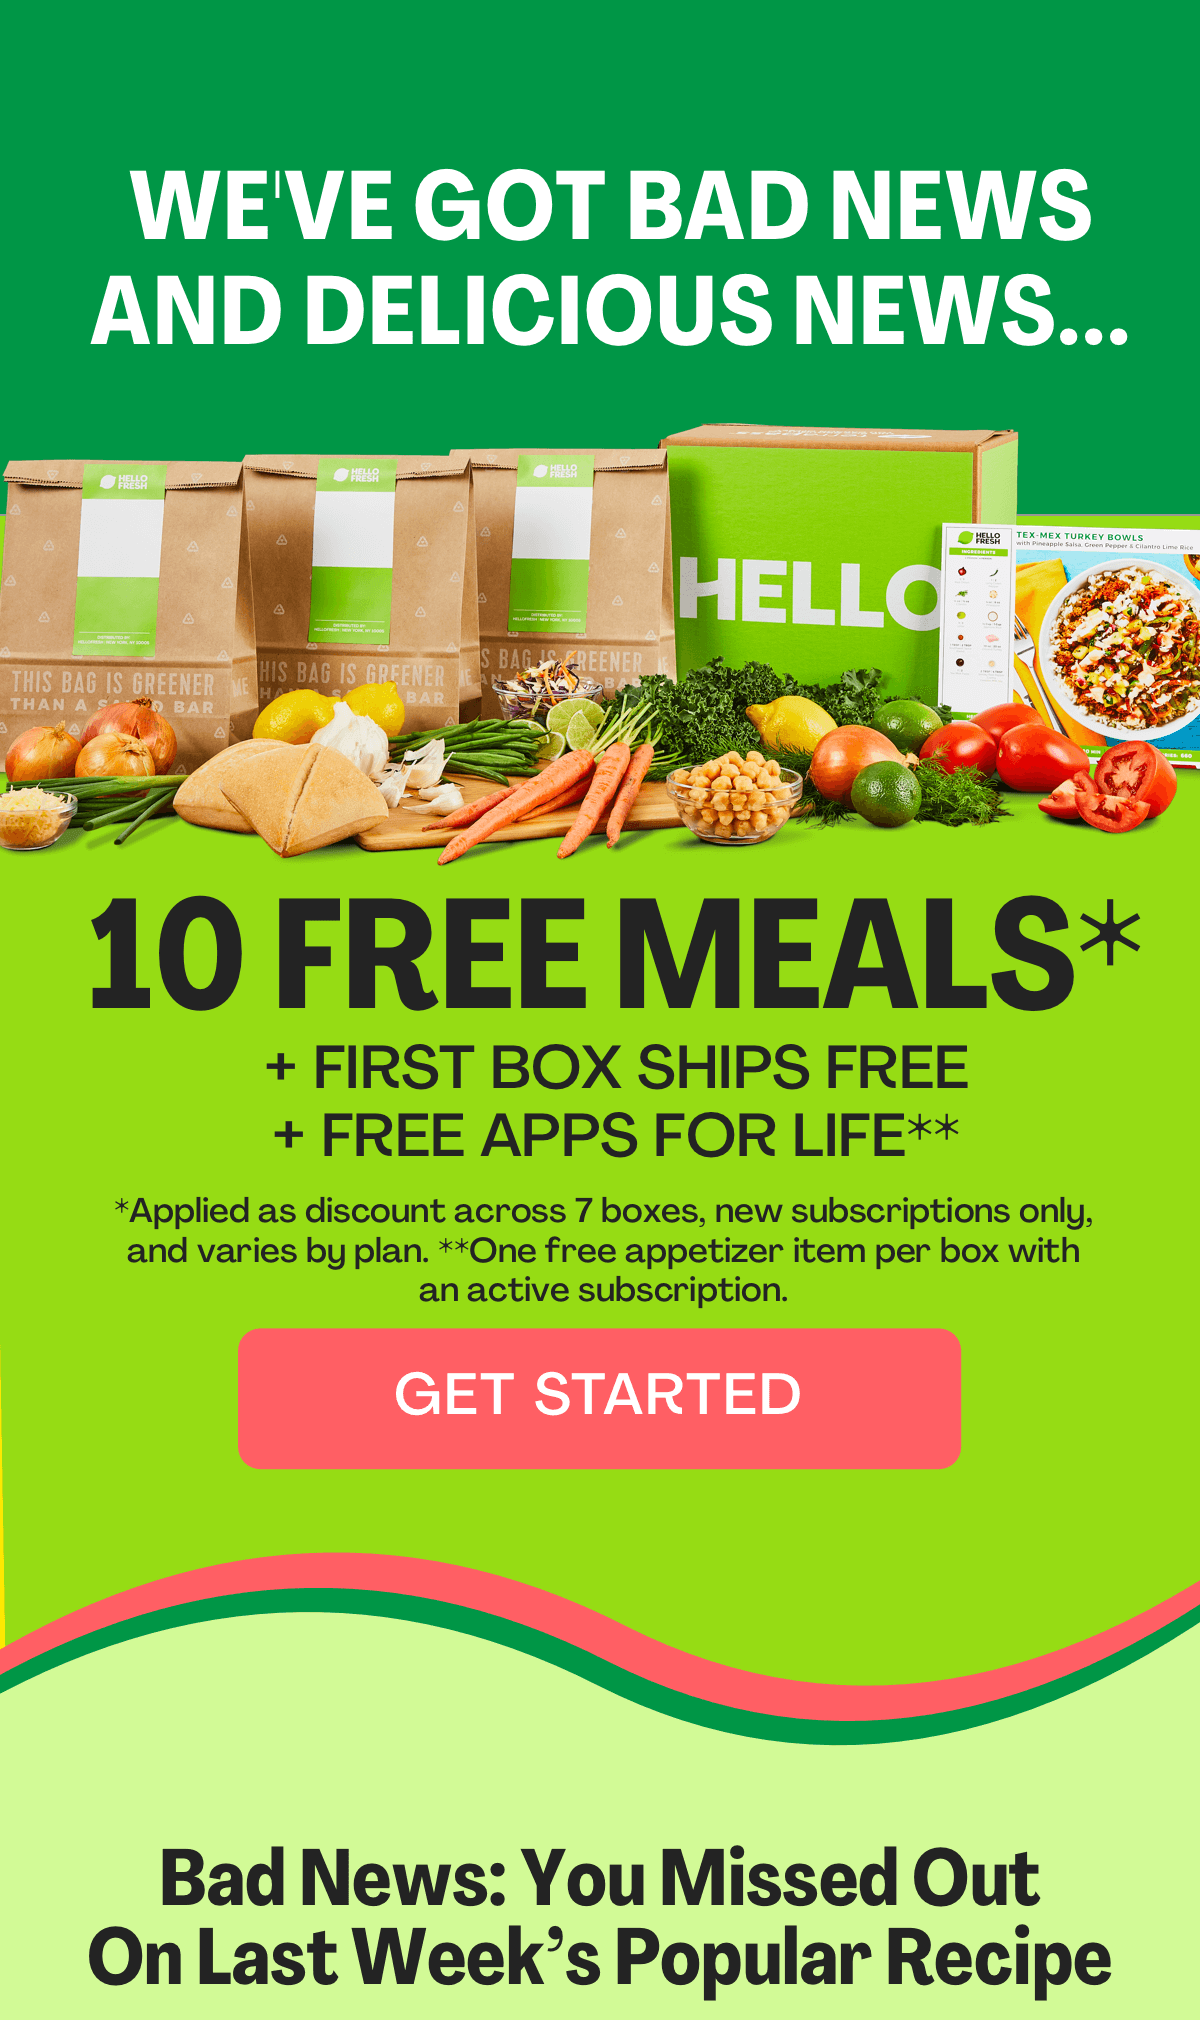 We've got bad news and delicious news...  Get 10 FREE MEALS + FIRST BOX SHIPS FREE PLUS FREE APPS FOR LIFE!